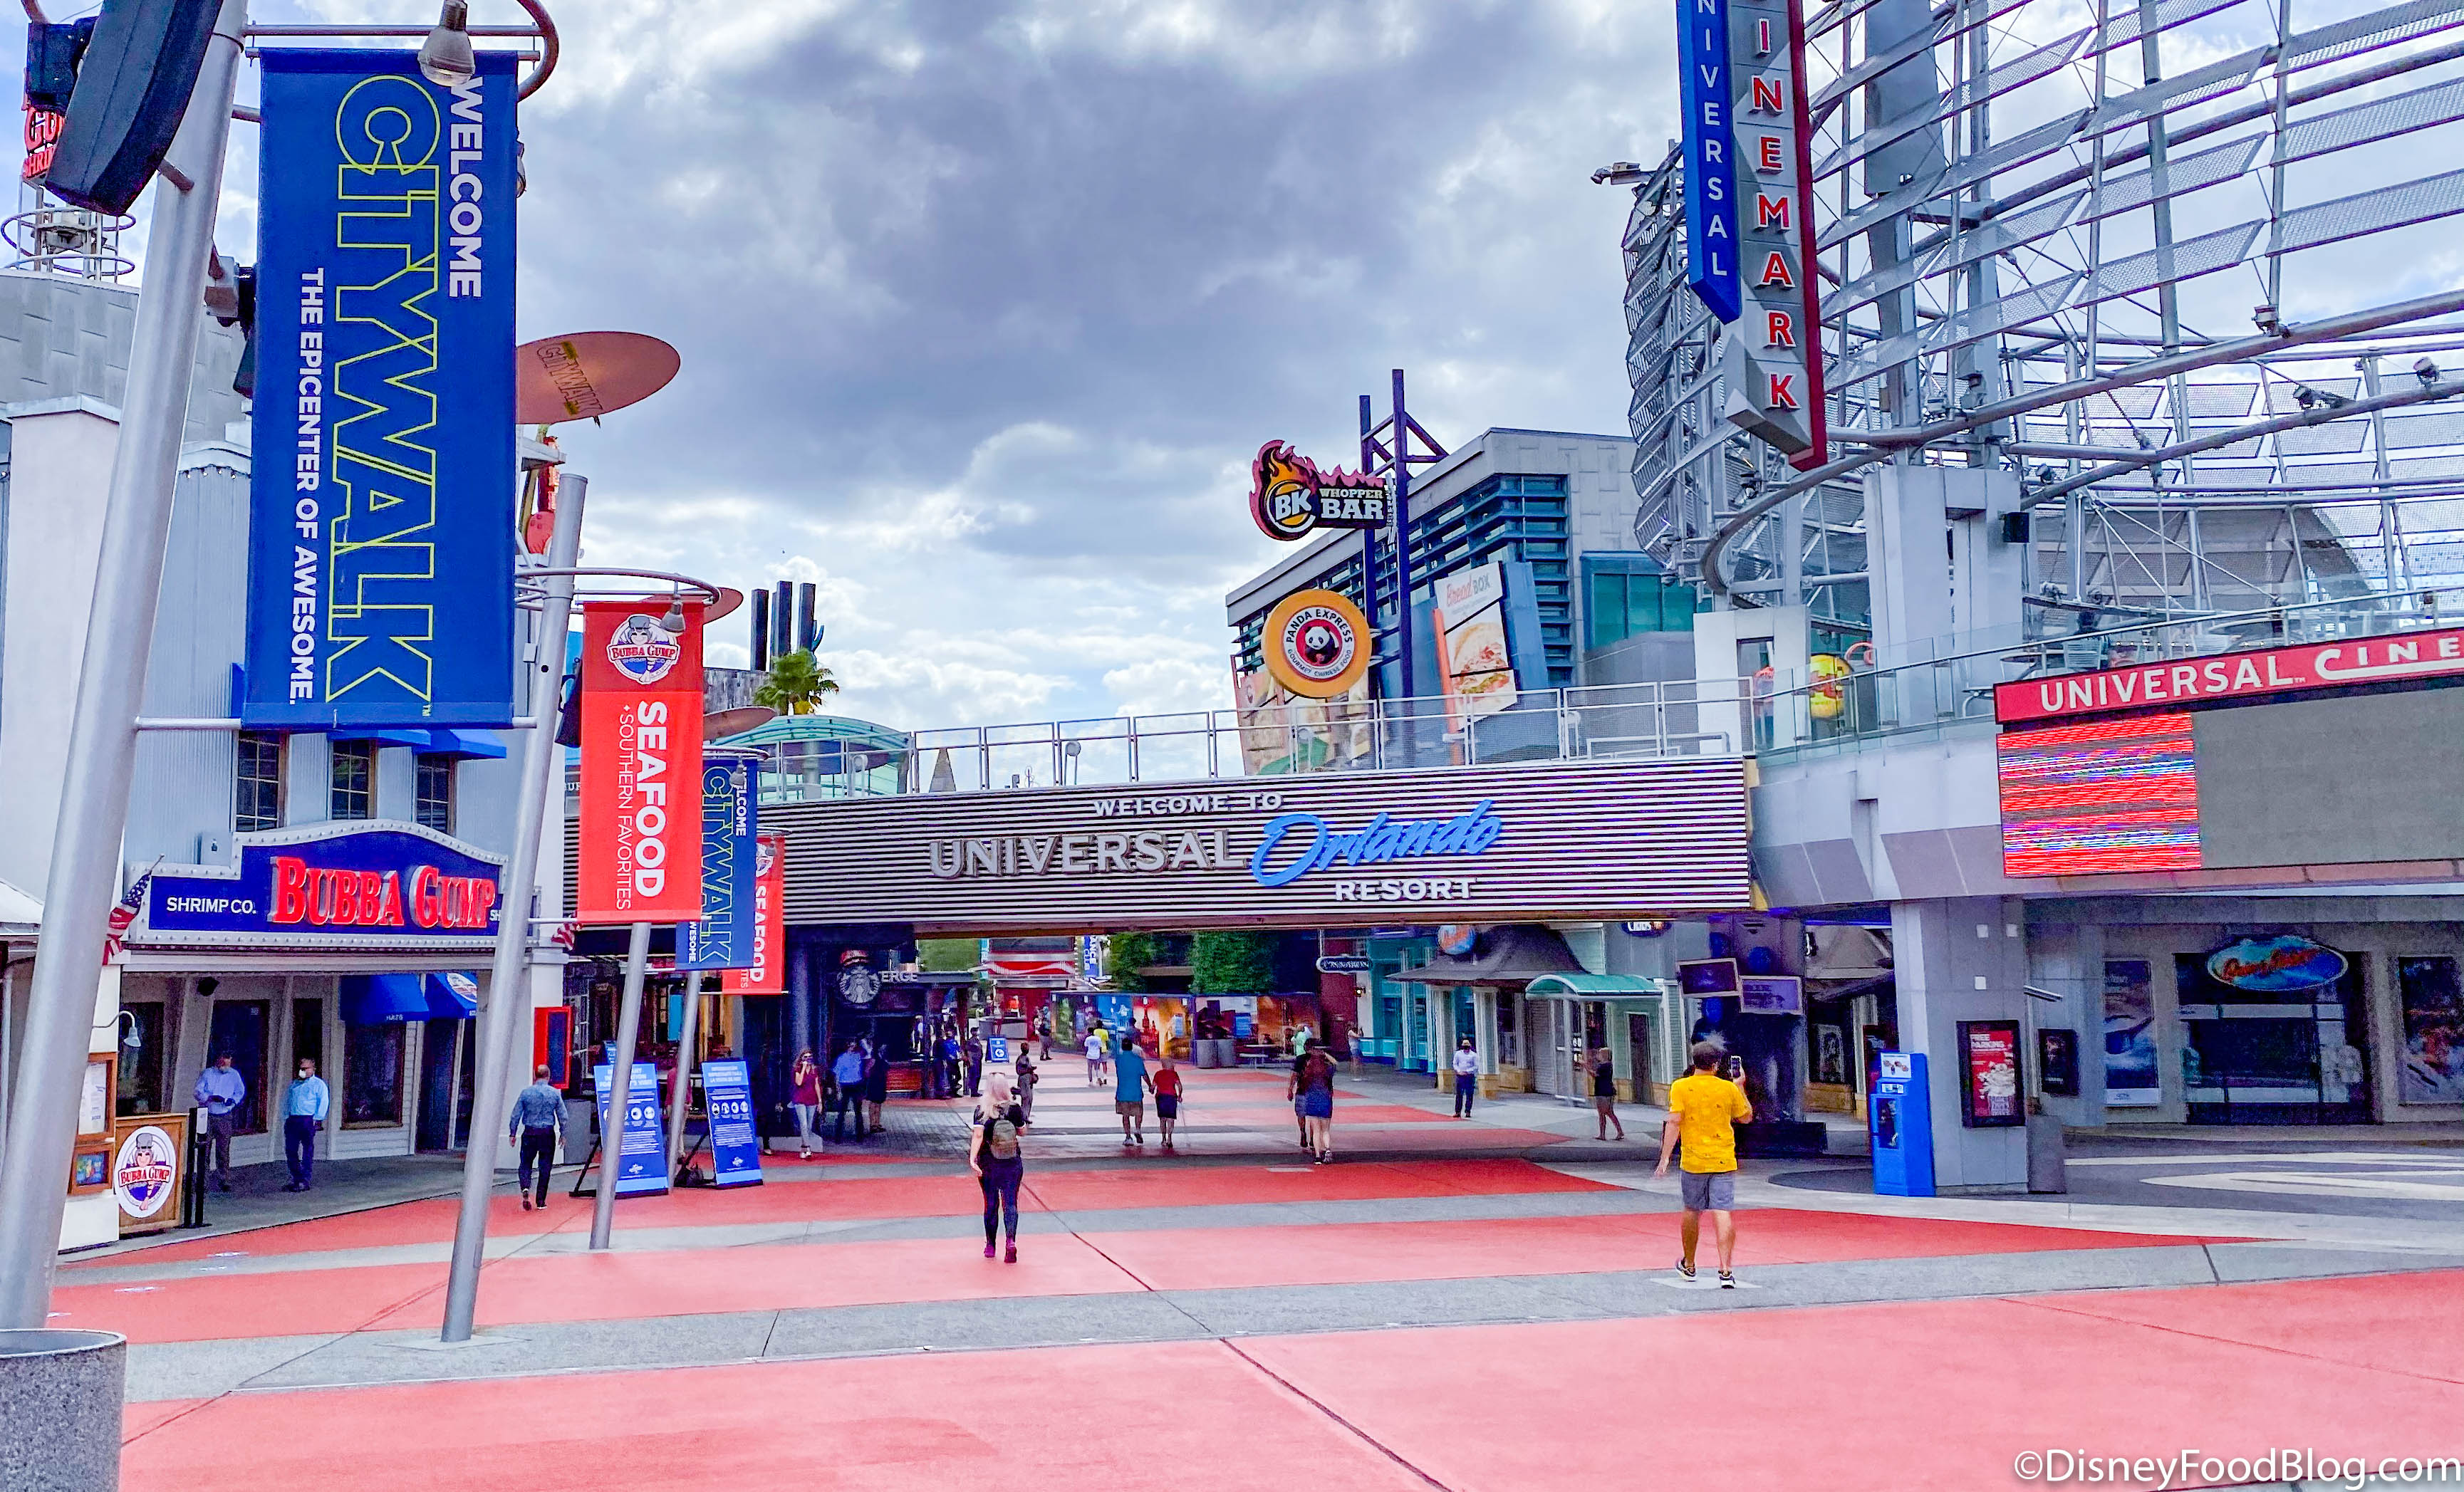 We Re Live From The Reopening Of Universal Orlando S Citywalk The Disney Food Blog